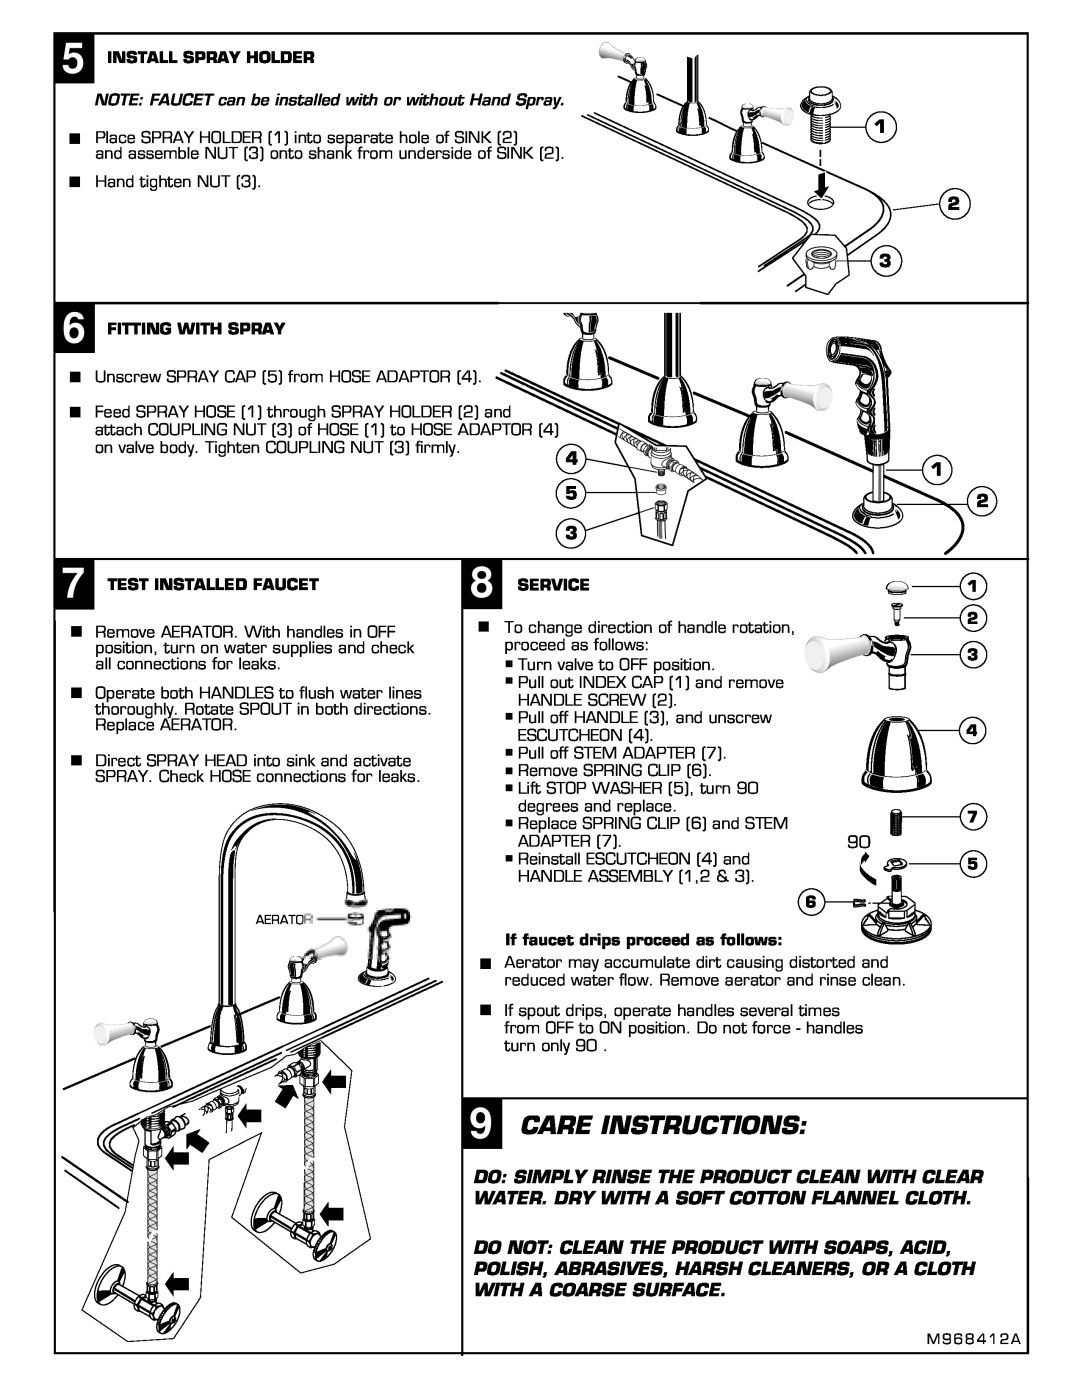 American Standard 4251 Care Instructions, 1 2, Install Spray Holder, Fitting With Spray, Test Installed Faucet, Service 